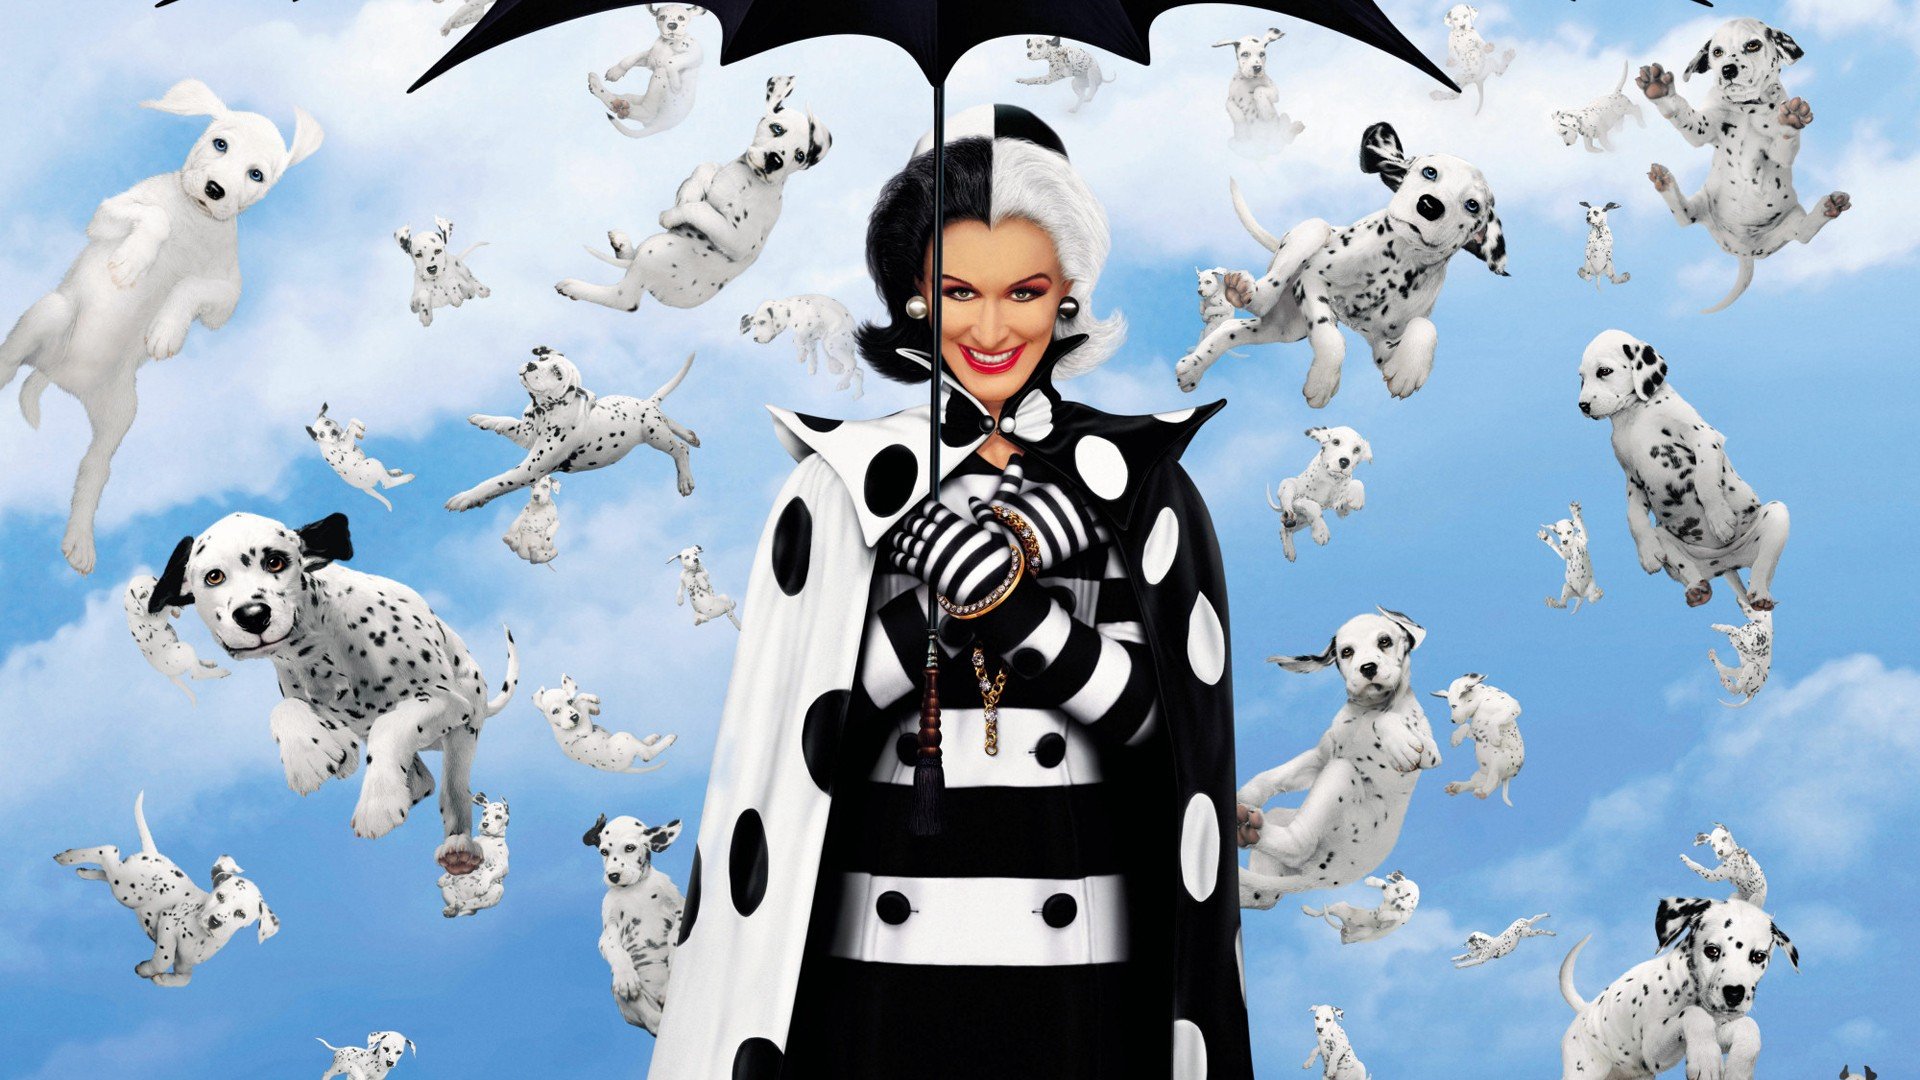 102 Dalmatians HD Wallpapers and Backgrounds.